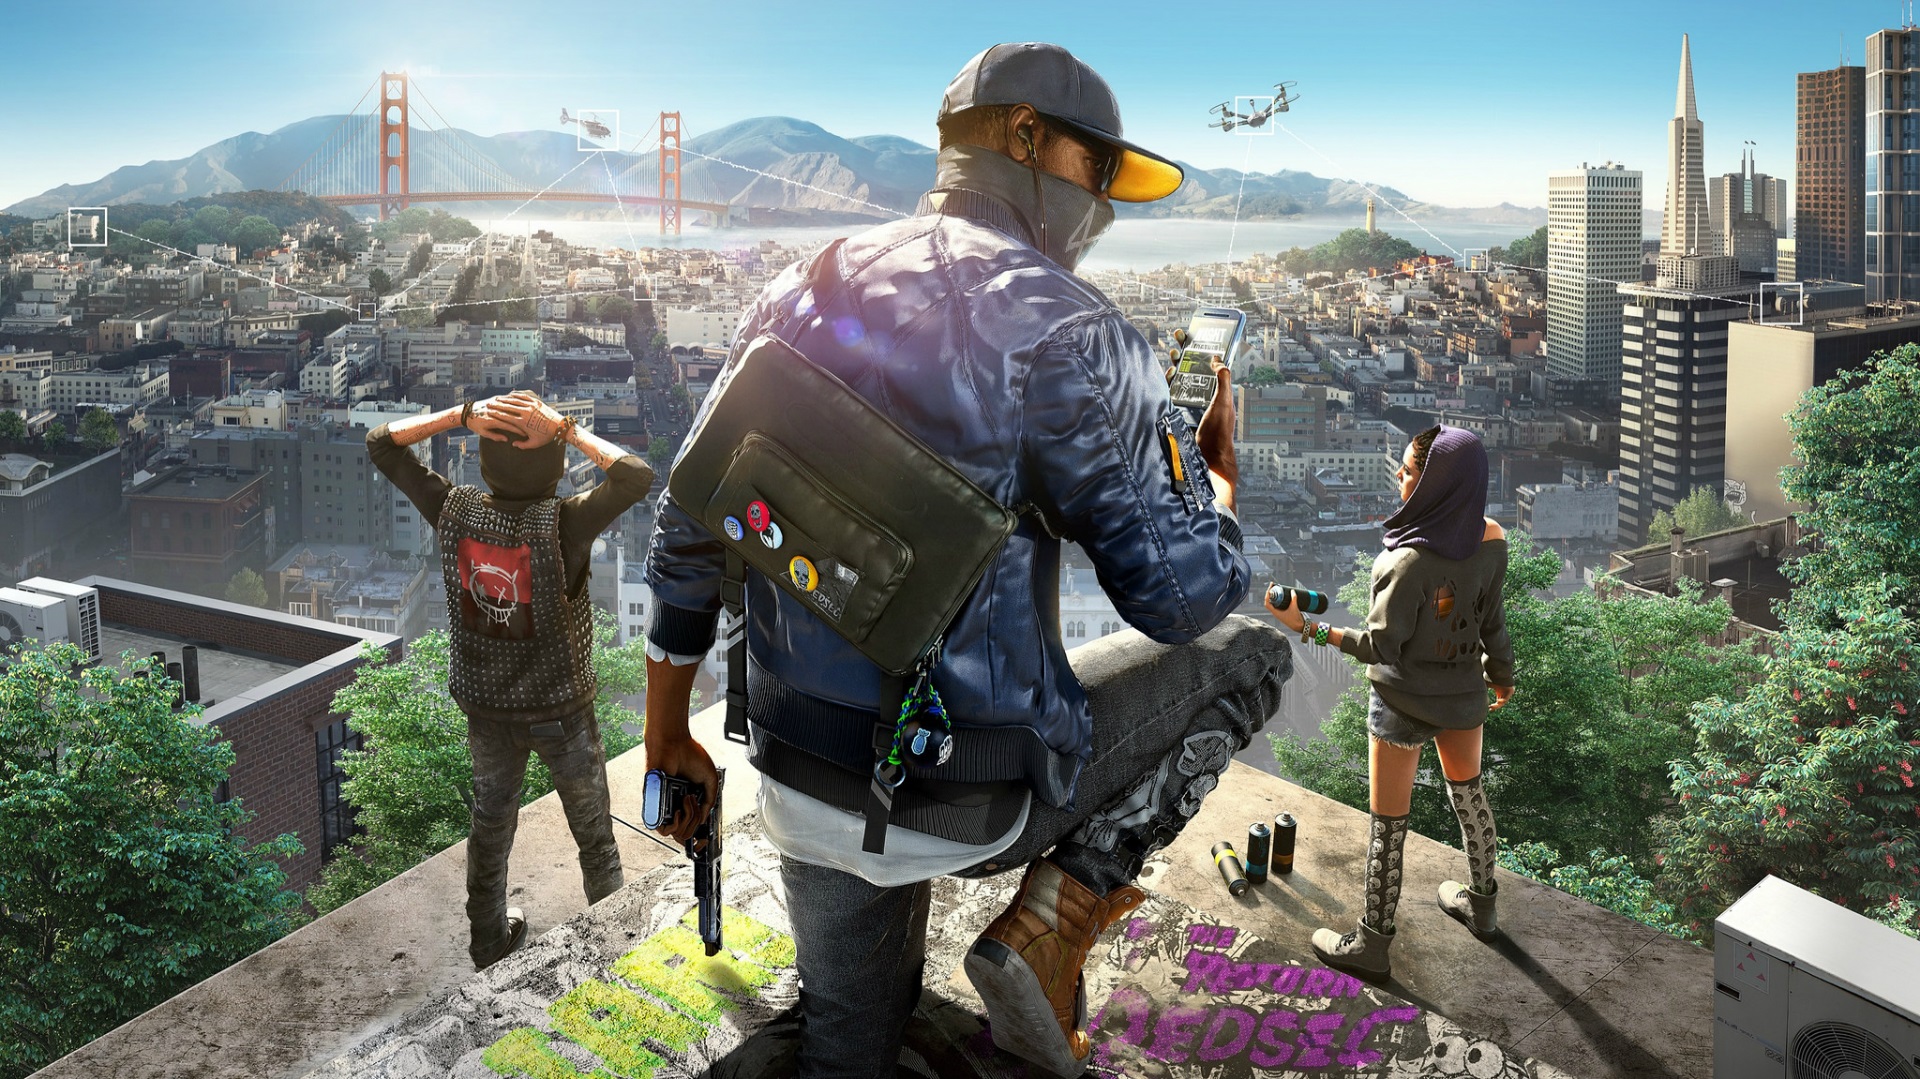 Play these Sony PS5 games while you wait for GTA 6 - Watch Dogs 2